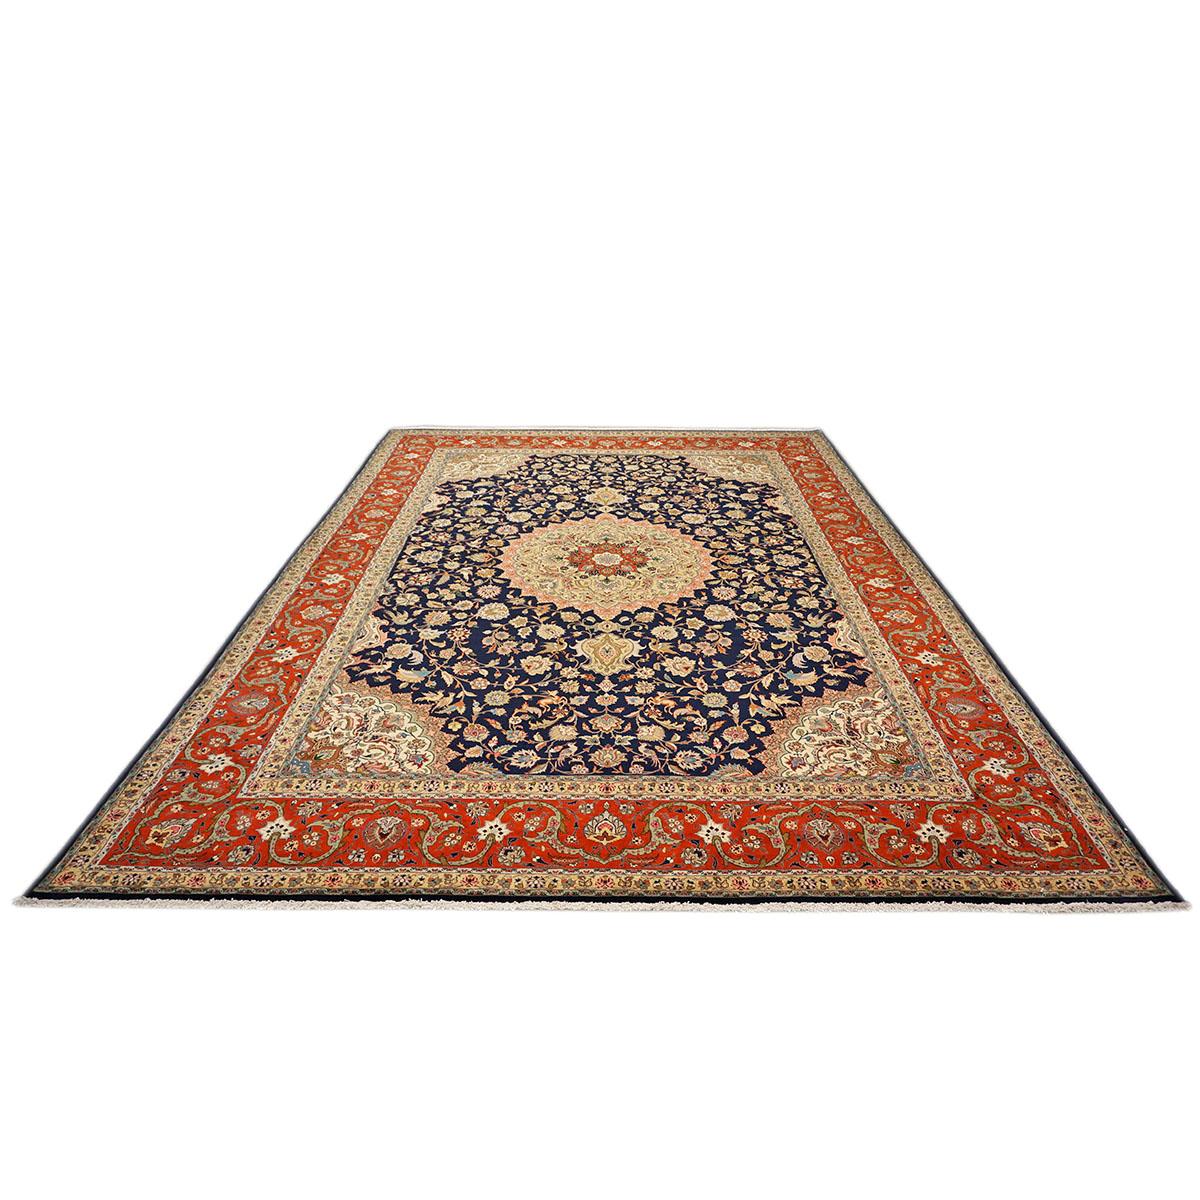 Ashly Fine Rugs presents a 1940s Antique Persian Tabriz. Tabriz is a northern city in modern-day Iran and has forever been famous for the fineness and craftsmanship of its handmade rugs. This piece has a beautiful deep navy blue background with the